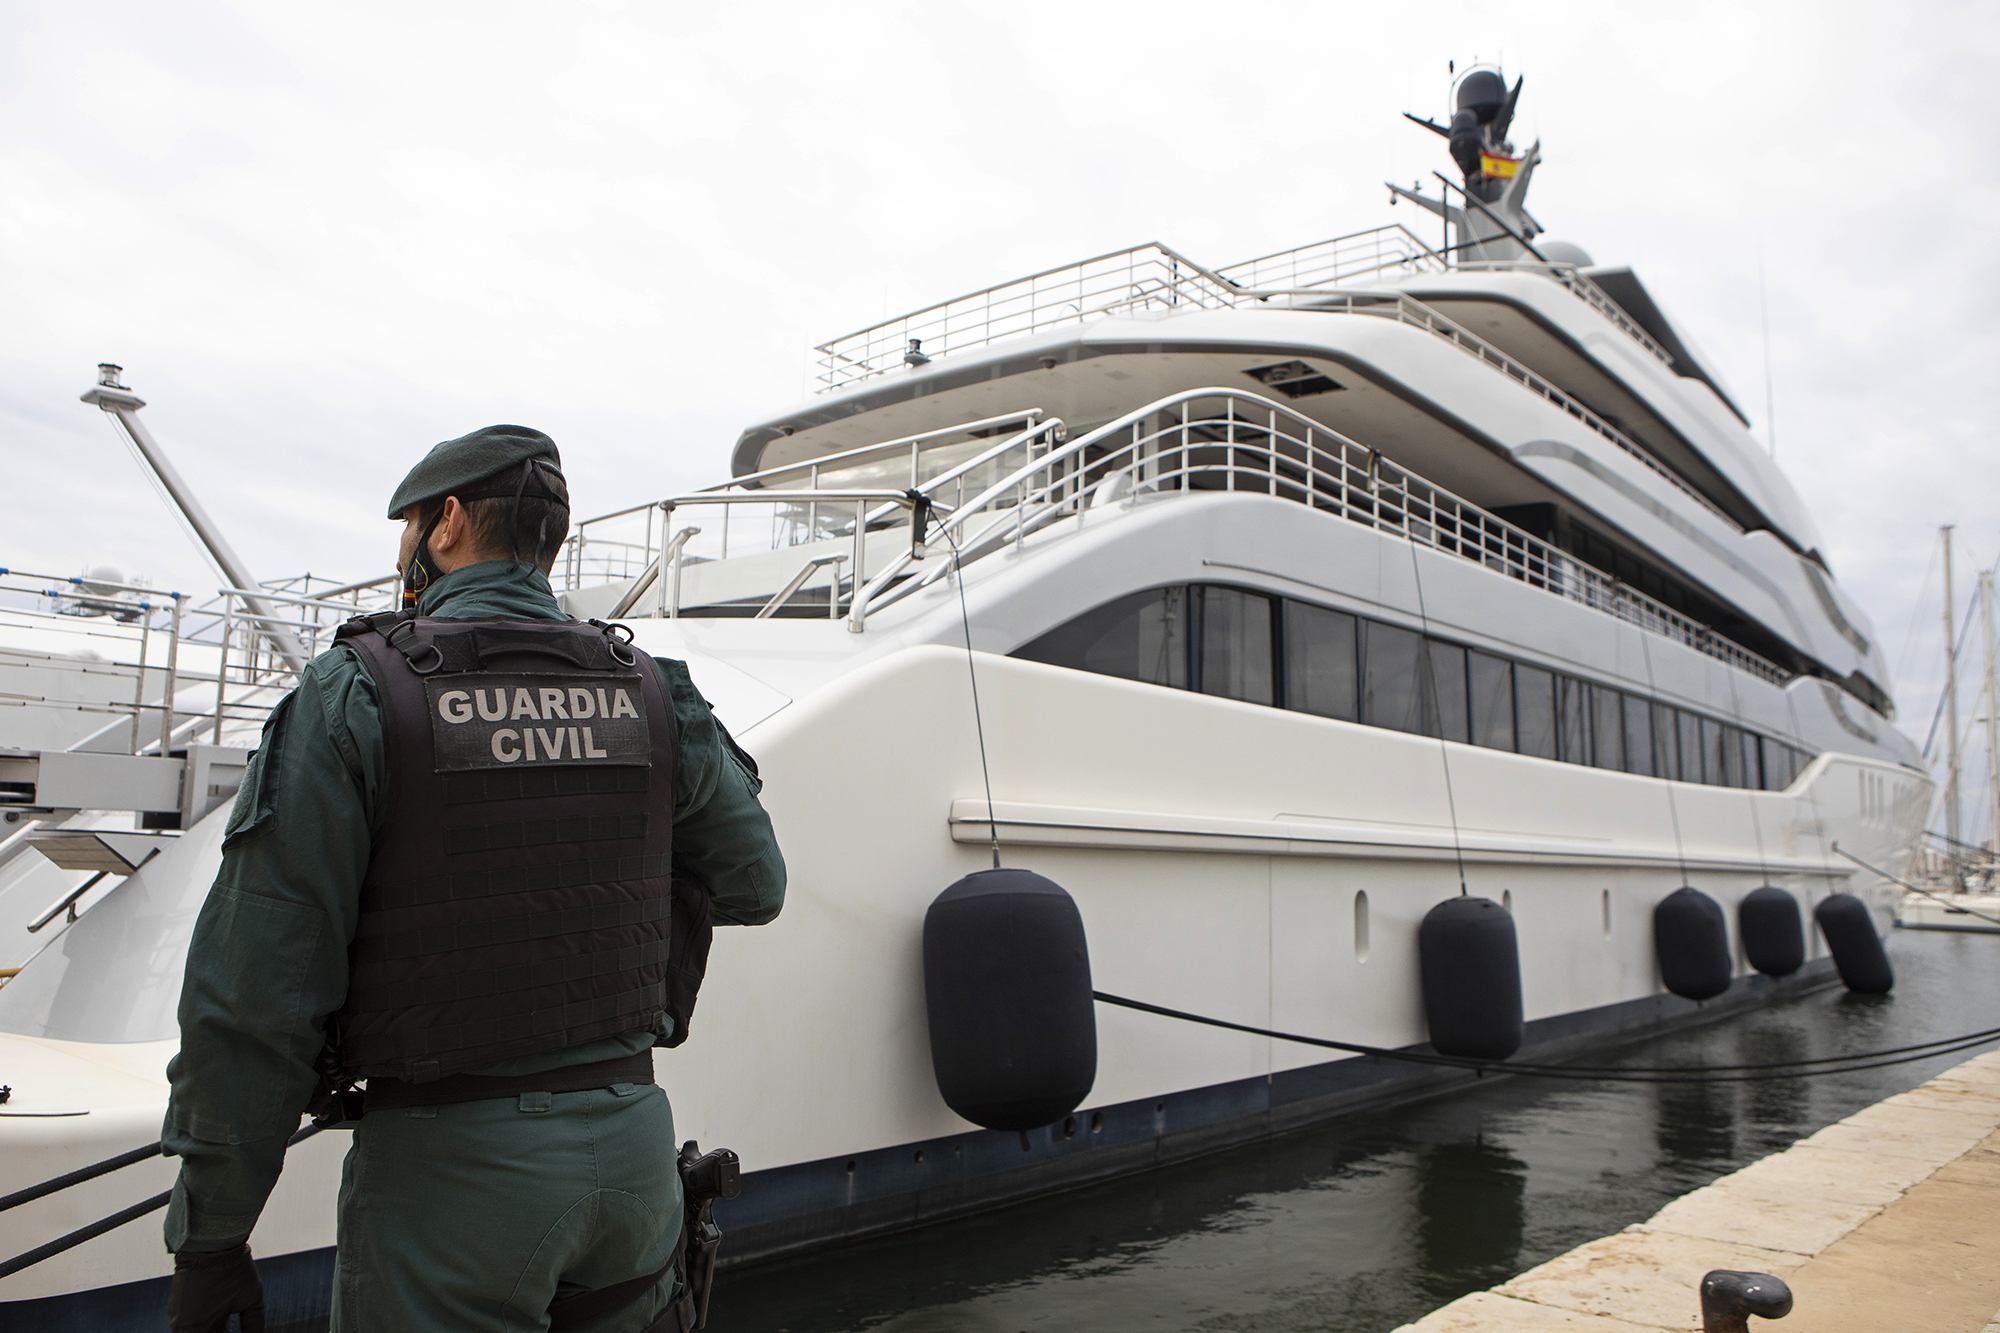 A Civil Guard stands by the yacht called Tango in Palma de Mallorca, Spain, Monday April 4, 2022. U...